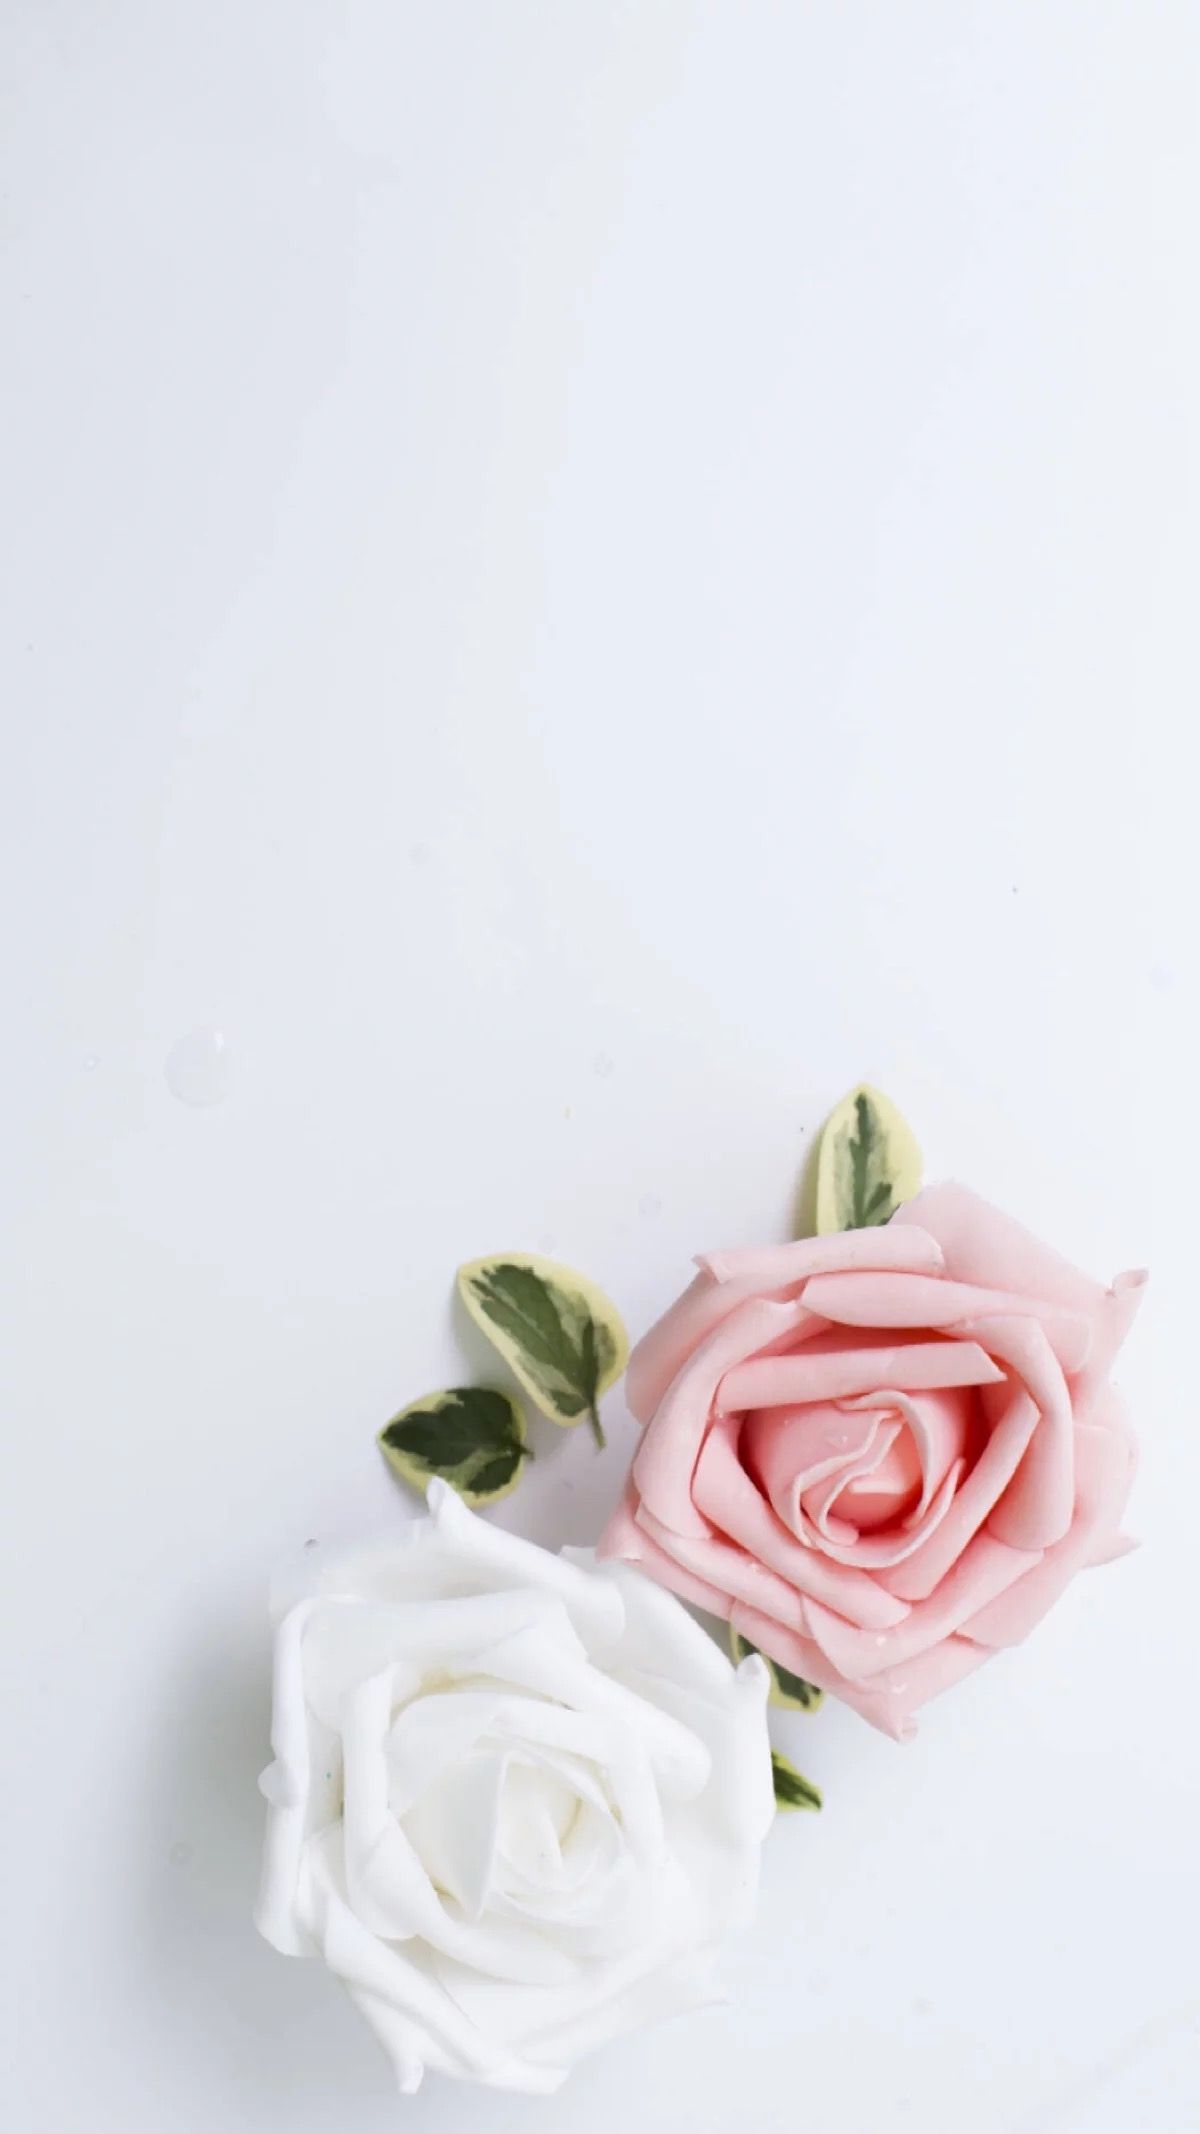 Pink and White Aesthetic Wallpaper Free Pink and White Aesthetic Background